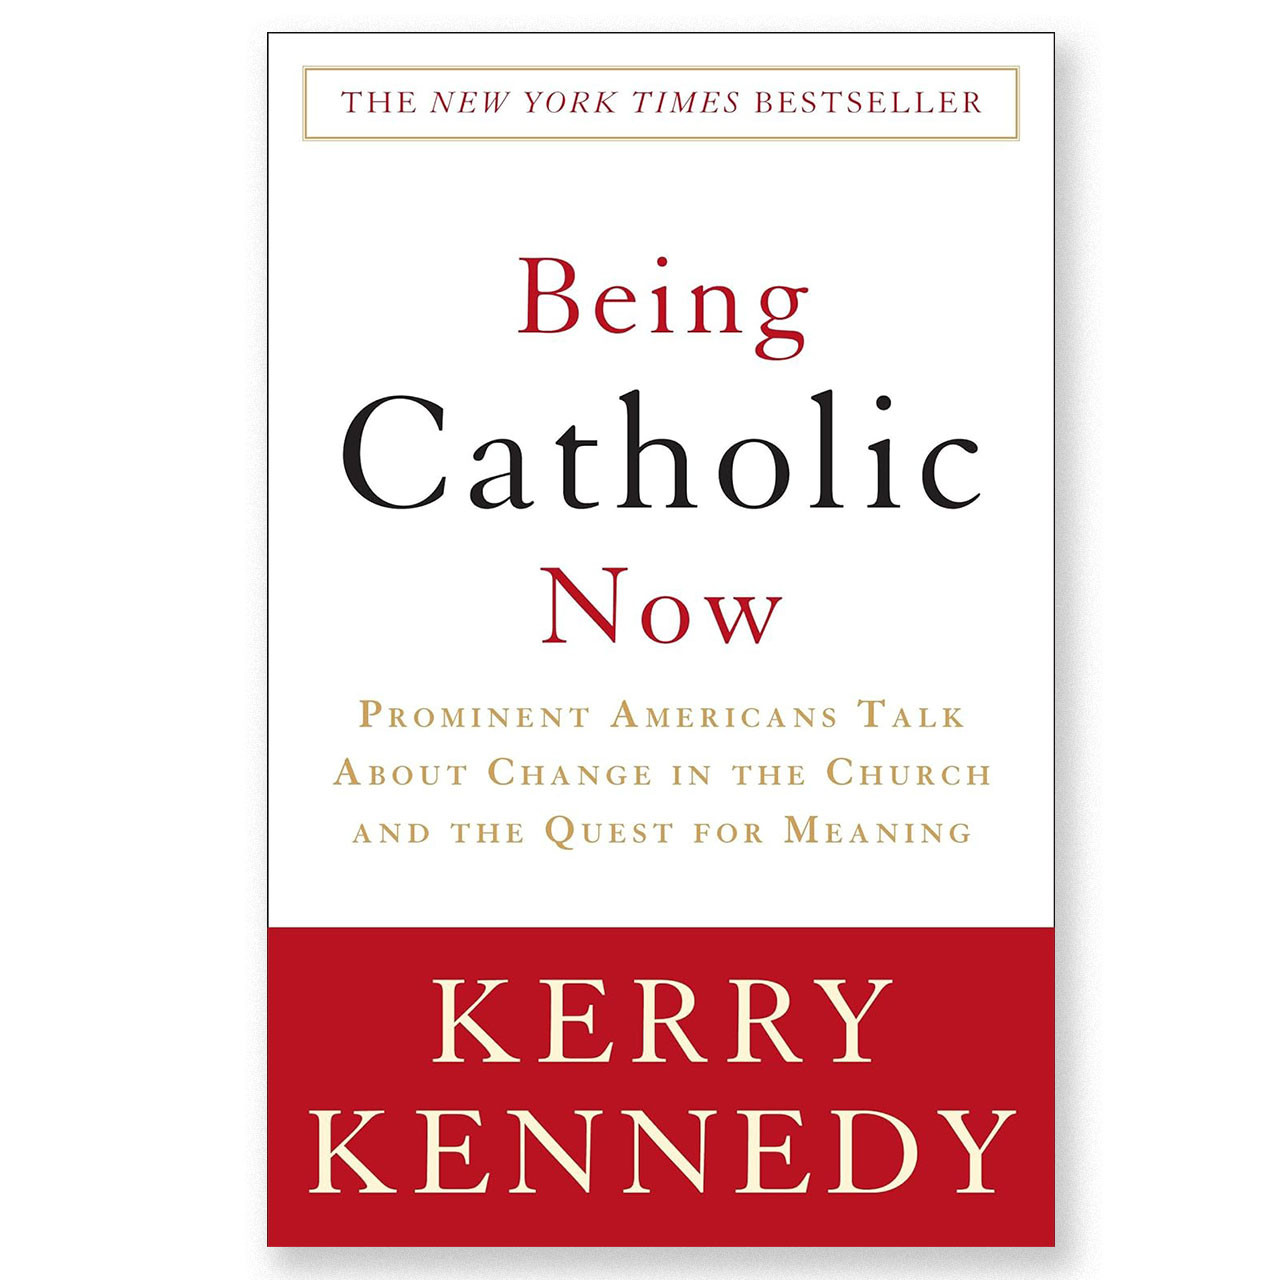 Being Catholic Now by Kerry Kennedy